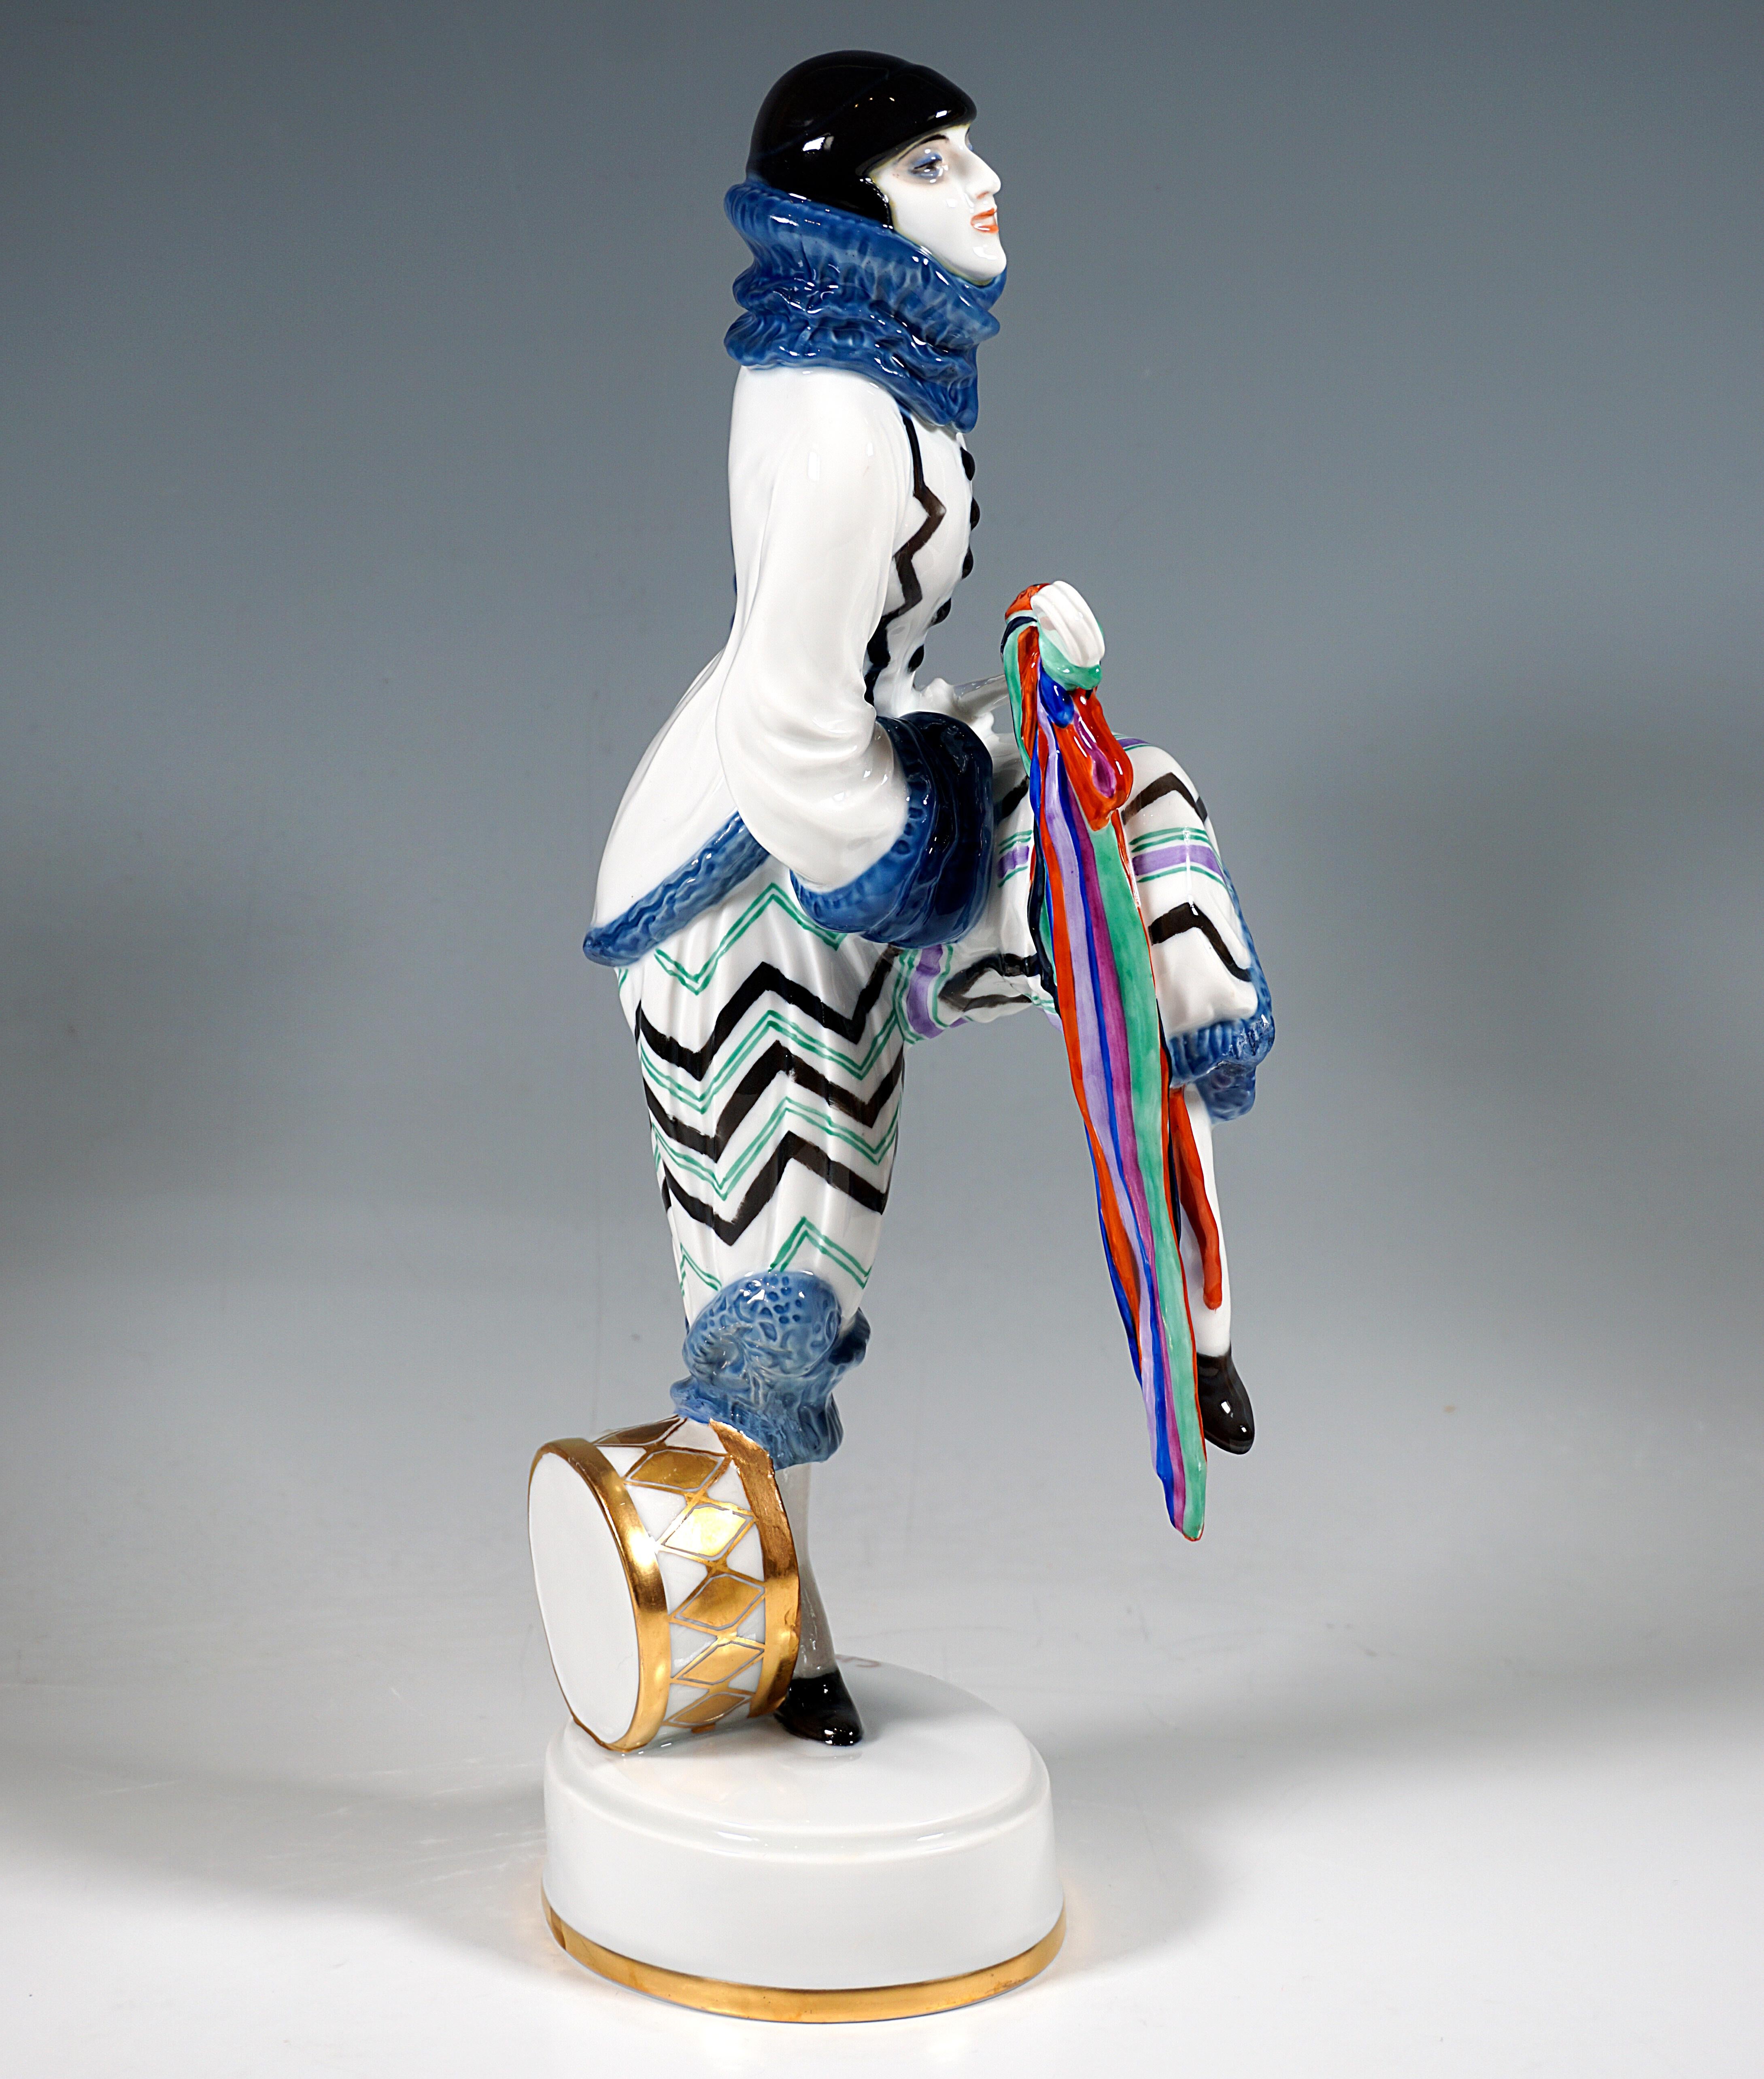 Very rare Porcelaine Figurine after the dancer Lena Amsel:
Dancer in an exotic Pierrot costume with a zigzag pattern, with large flounced cuffs and matching high collar, posing in marching step with one leg raised and playing a lute with a long